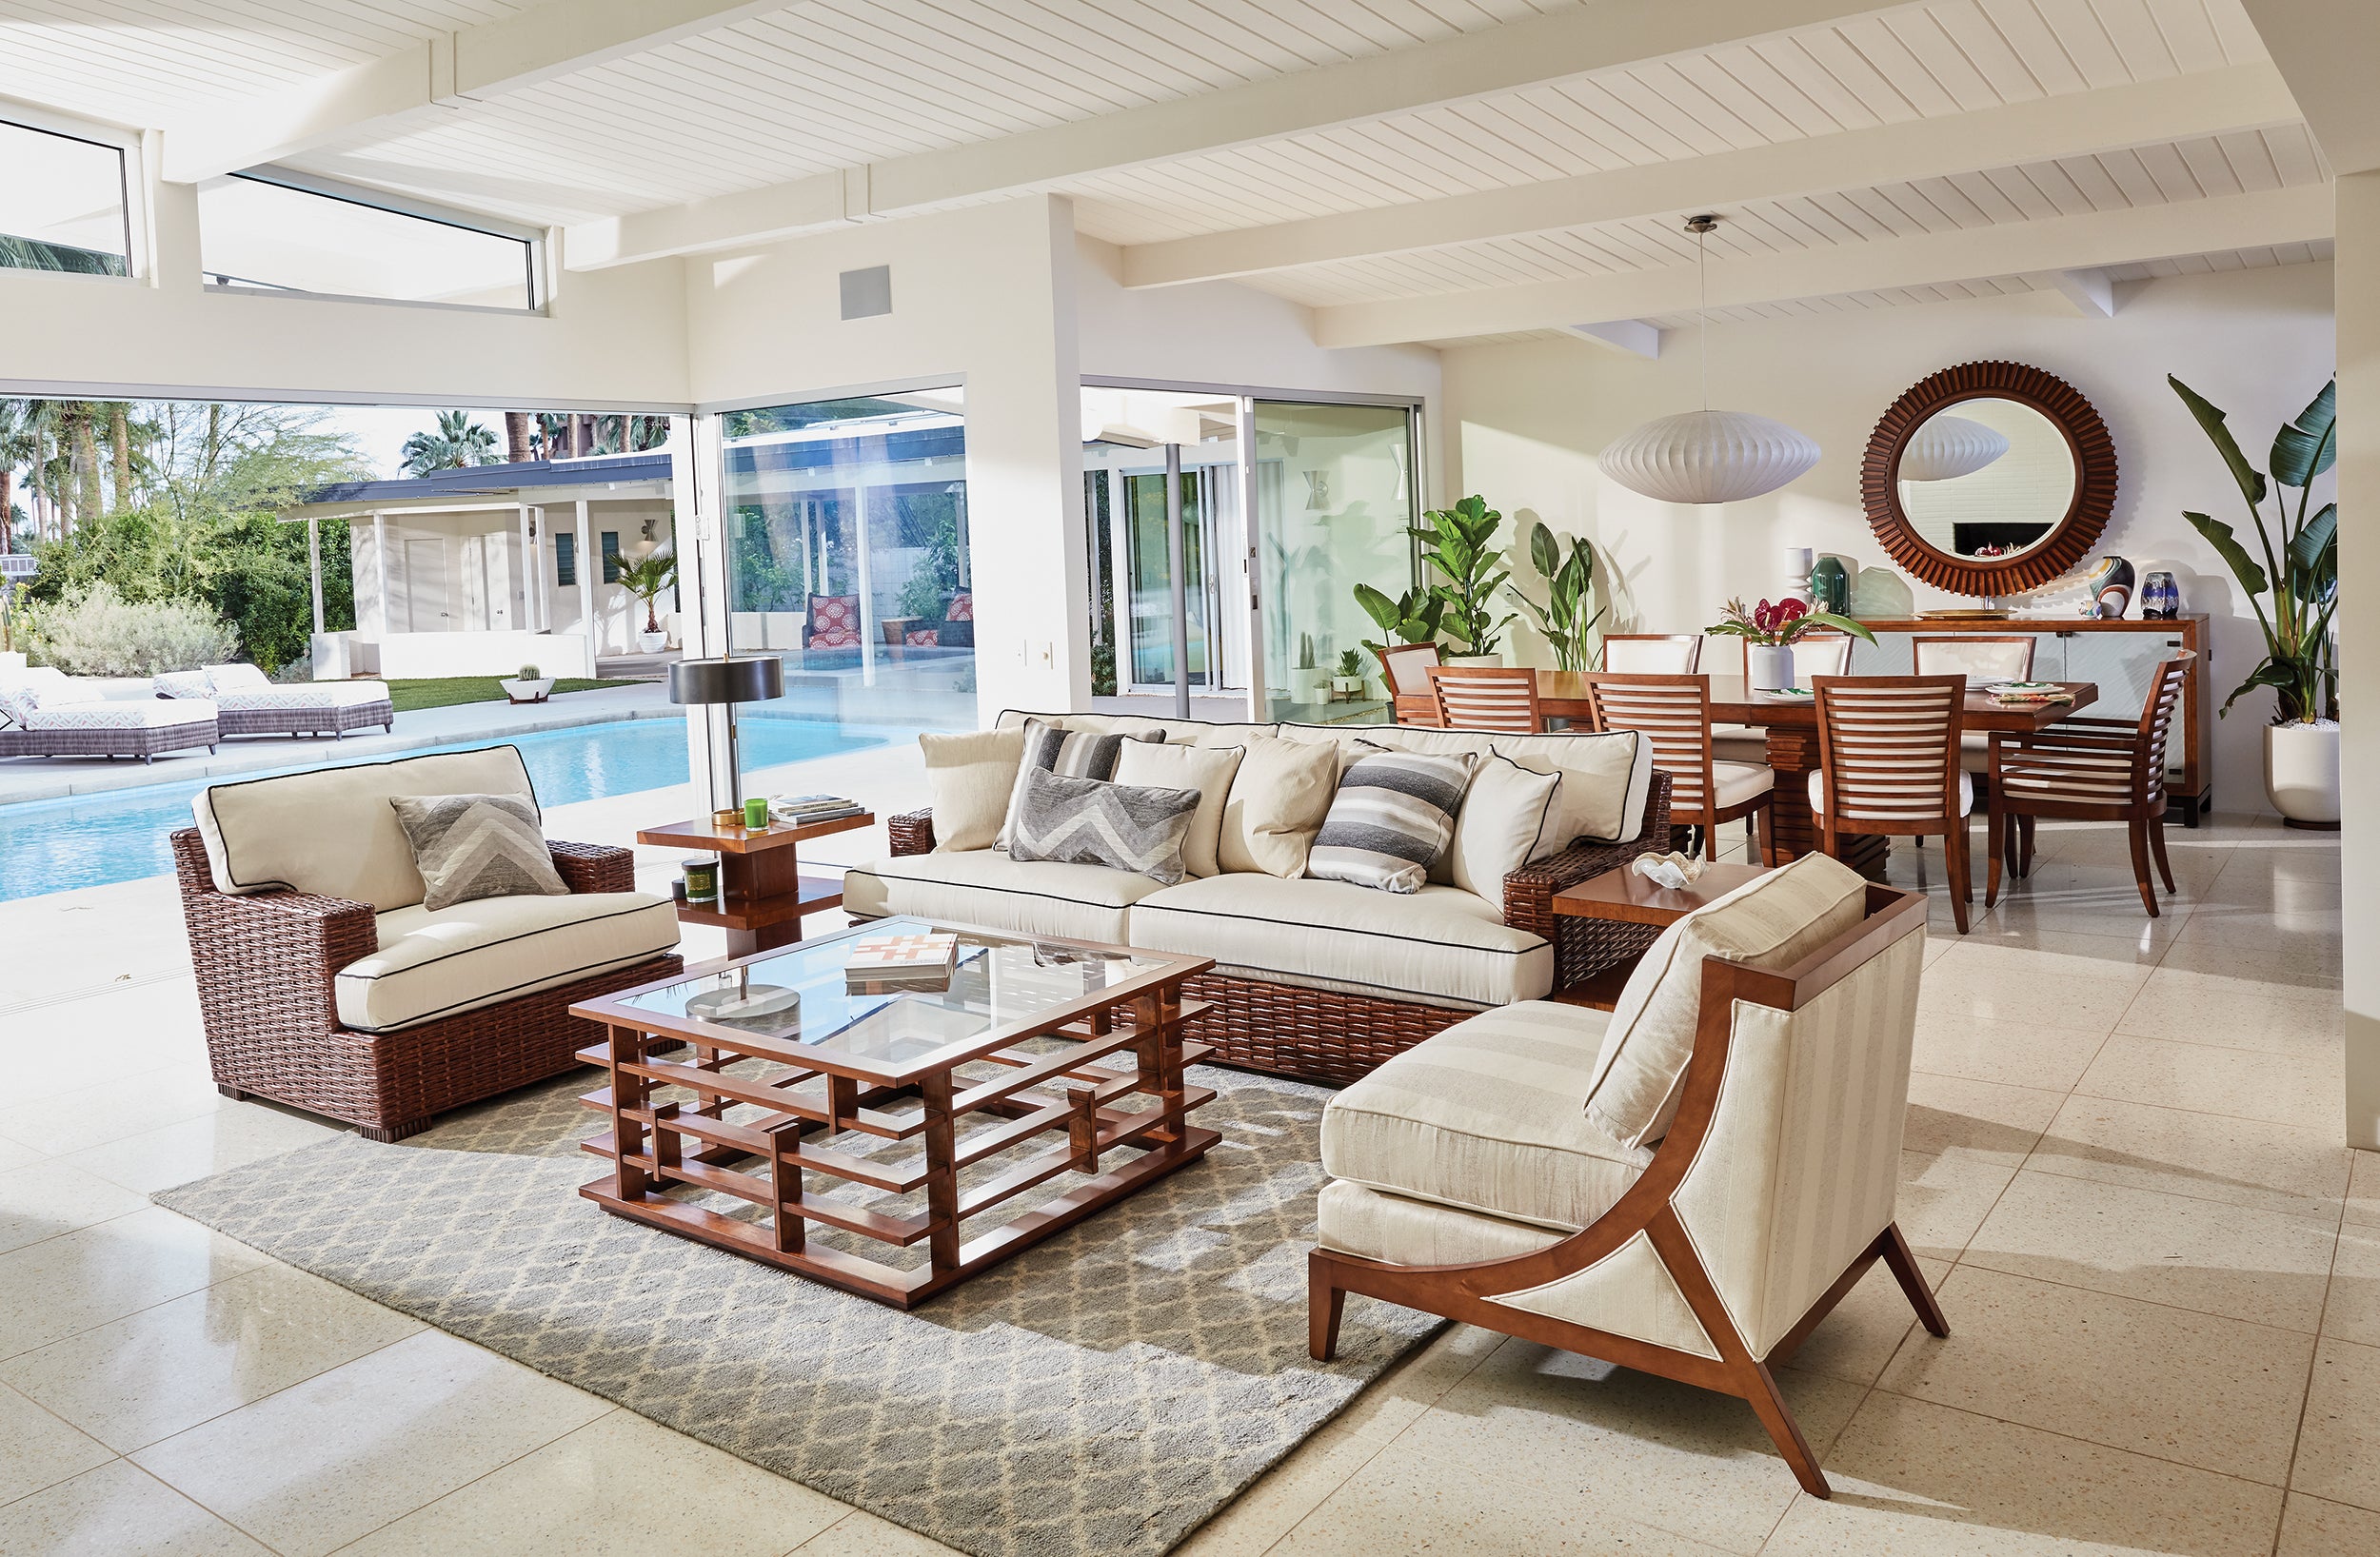 A living room scene from Tommy Bahama Home's Island Fusion collection featuring a rattan and fabric sofa and arm chair with a wood and glass modern cocktail table.